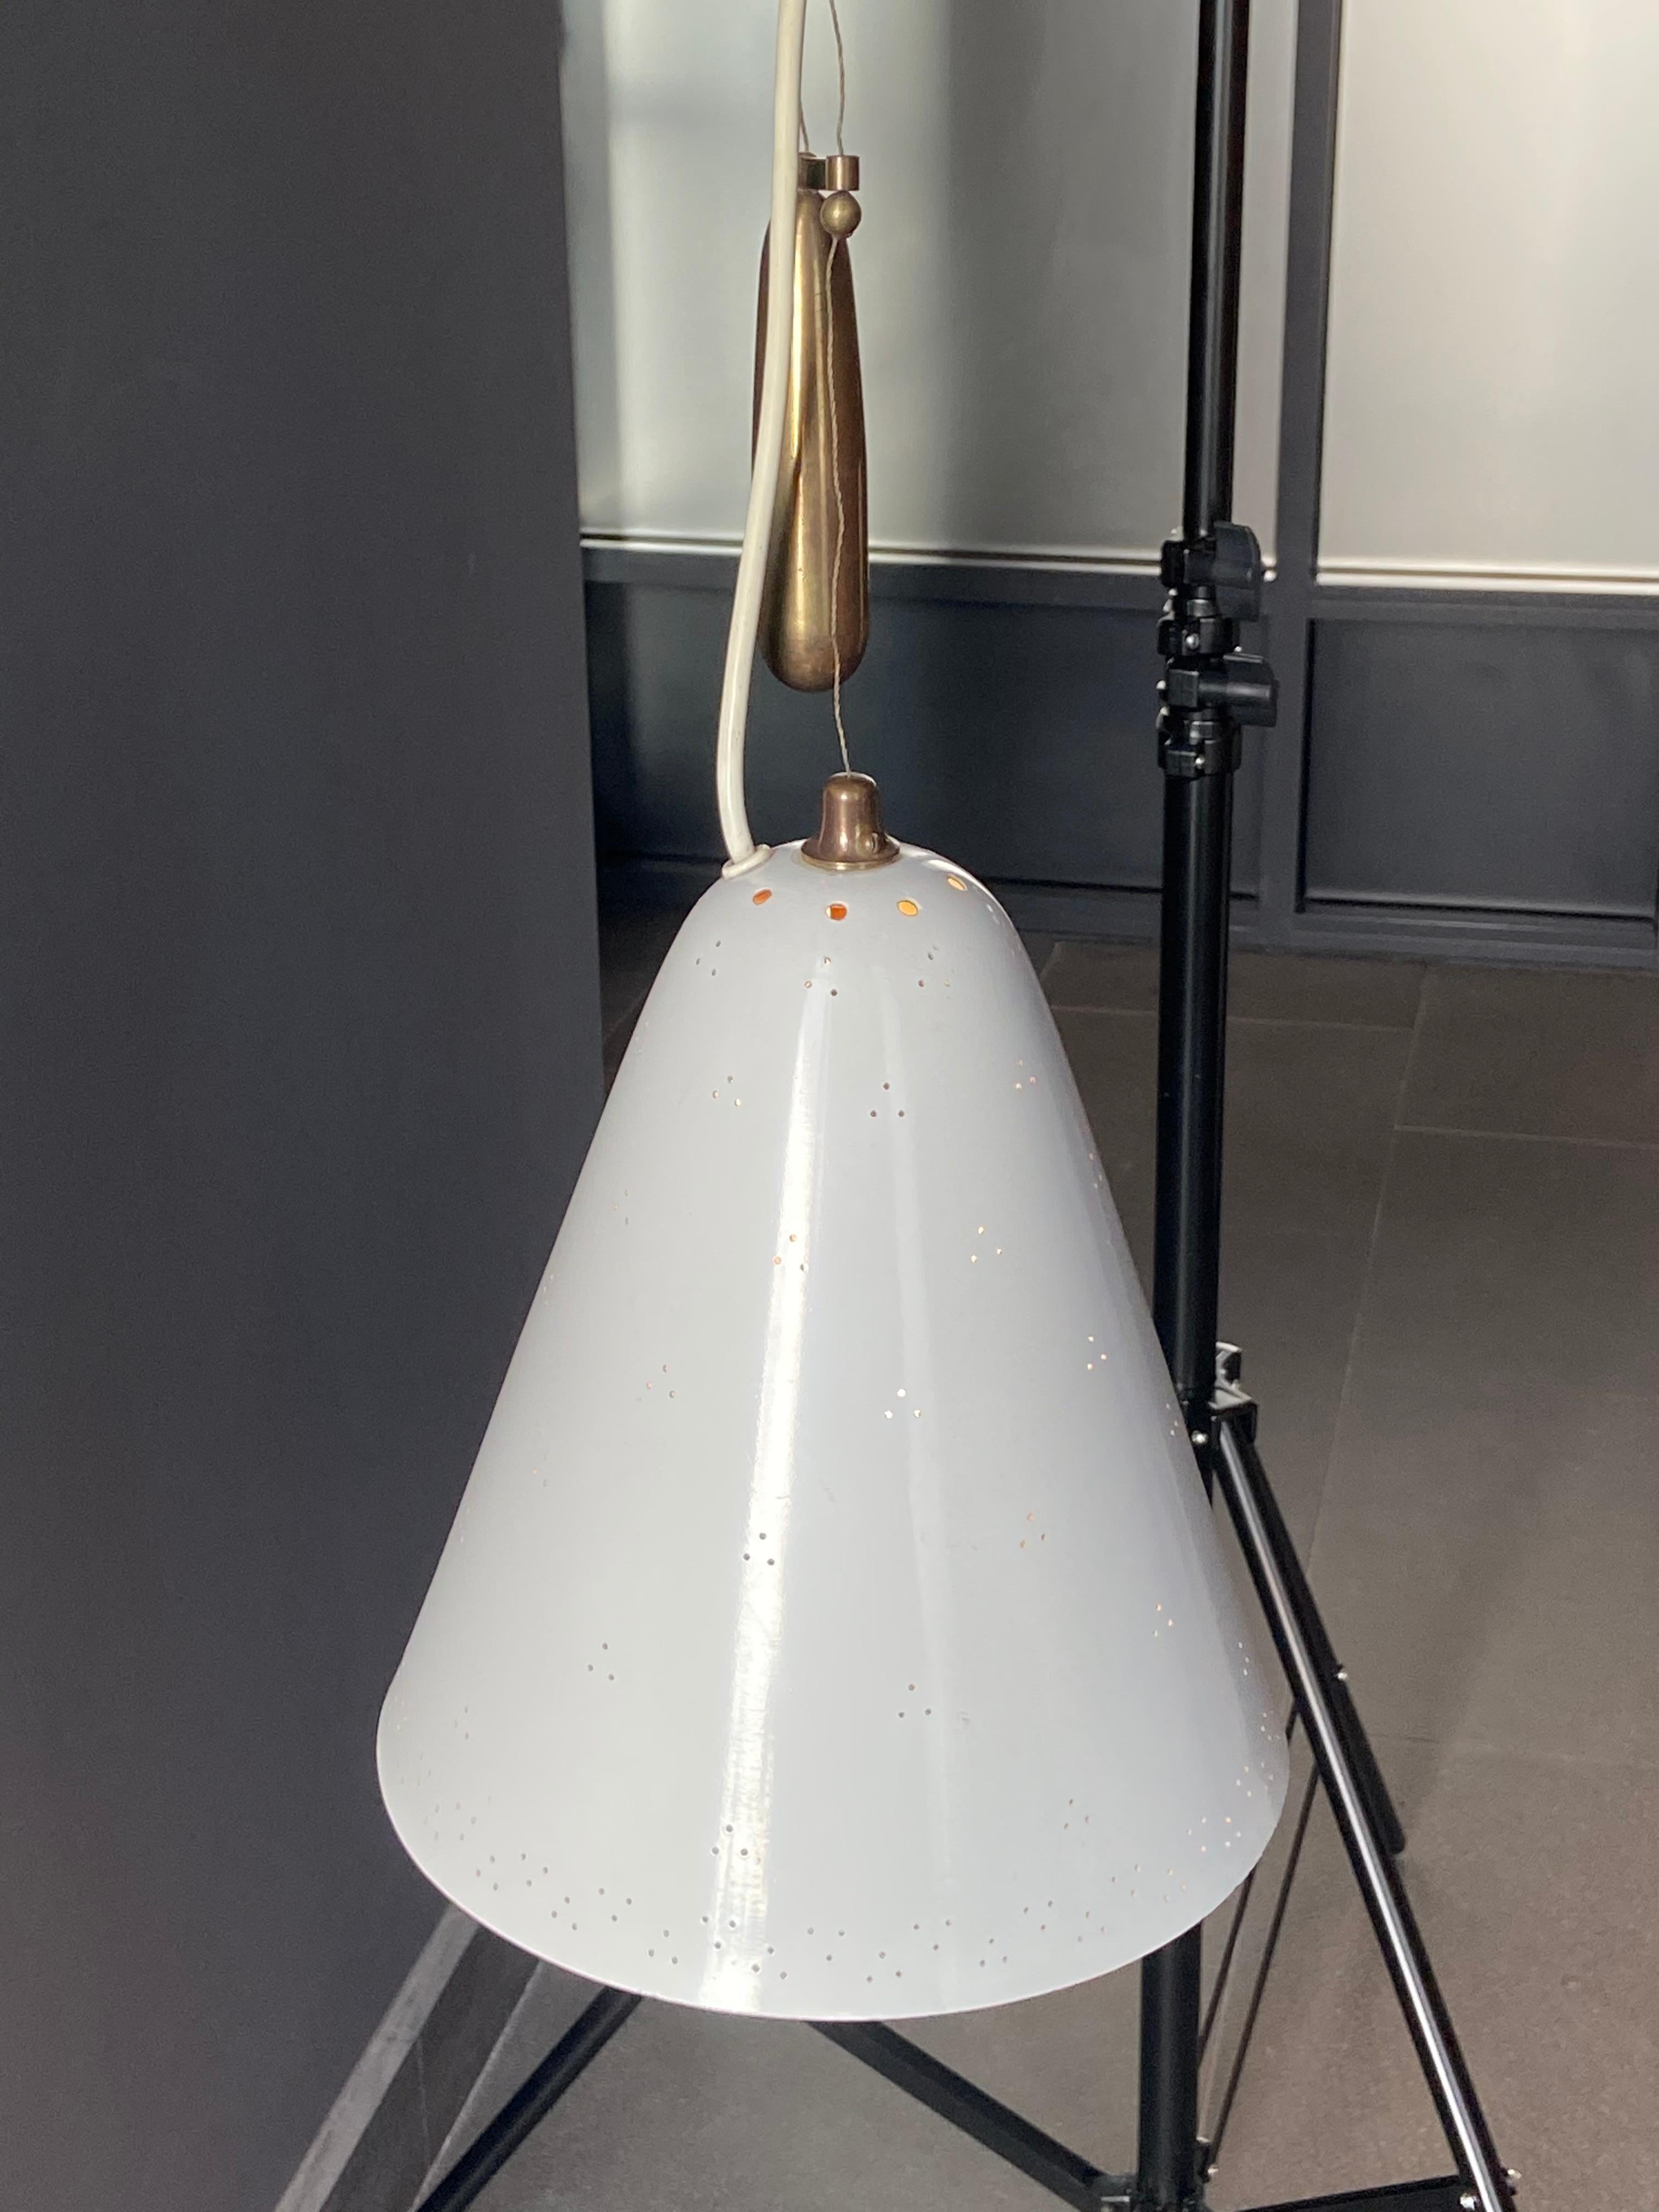 Polished Paavo Tynell Pendant Light, Idman Oy Model No. A 1942, circa 1950s For Sale